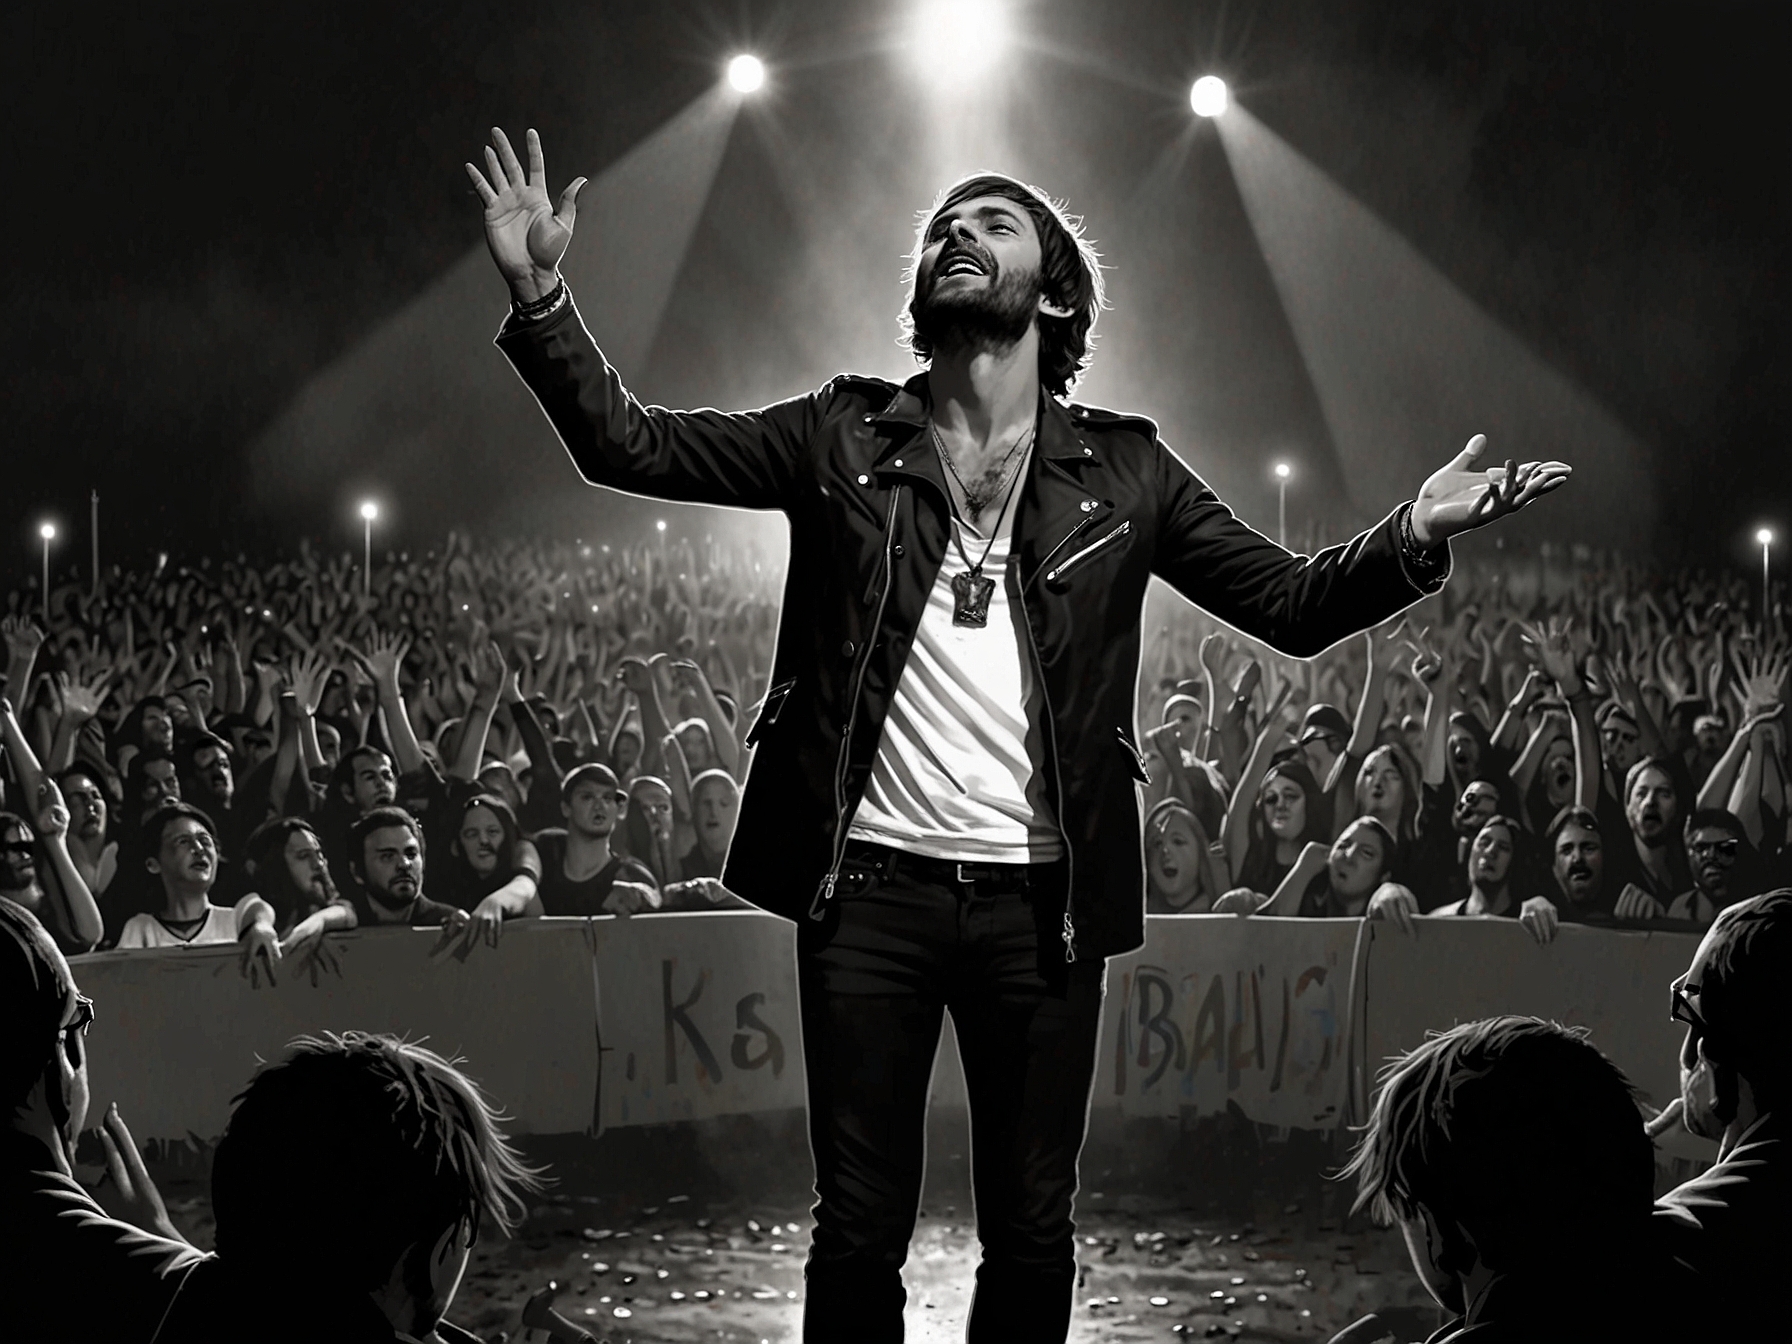 Kasabian performing at Glastonbury without Tom Meighan, highlighting the band's resilience and comeback amid contrasting fortunes following his departure.